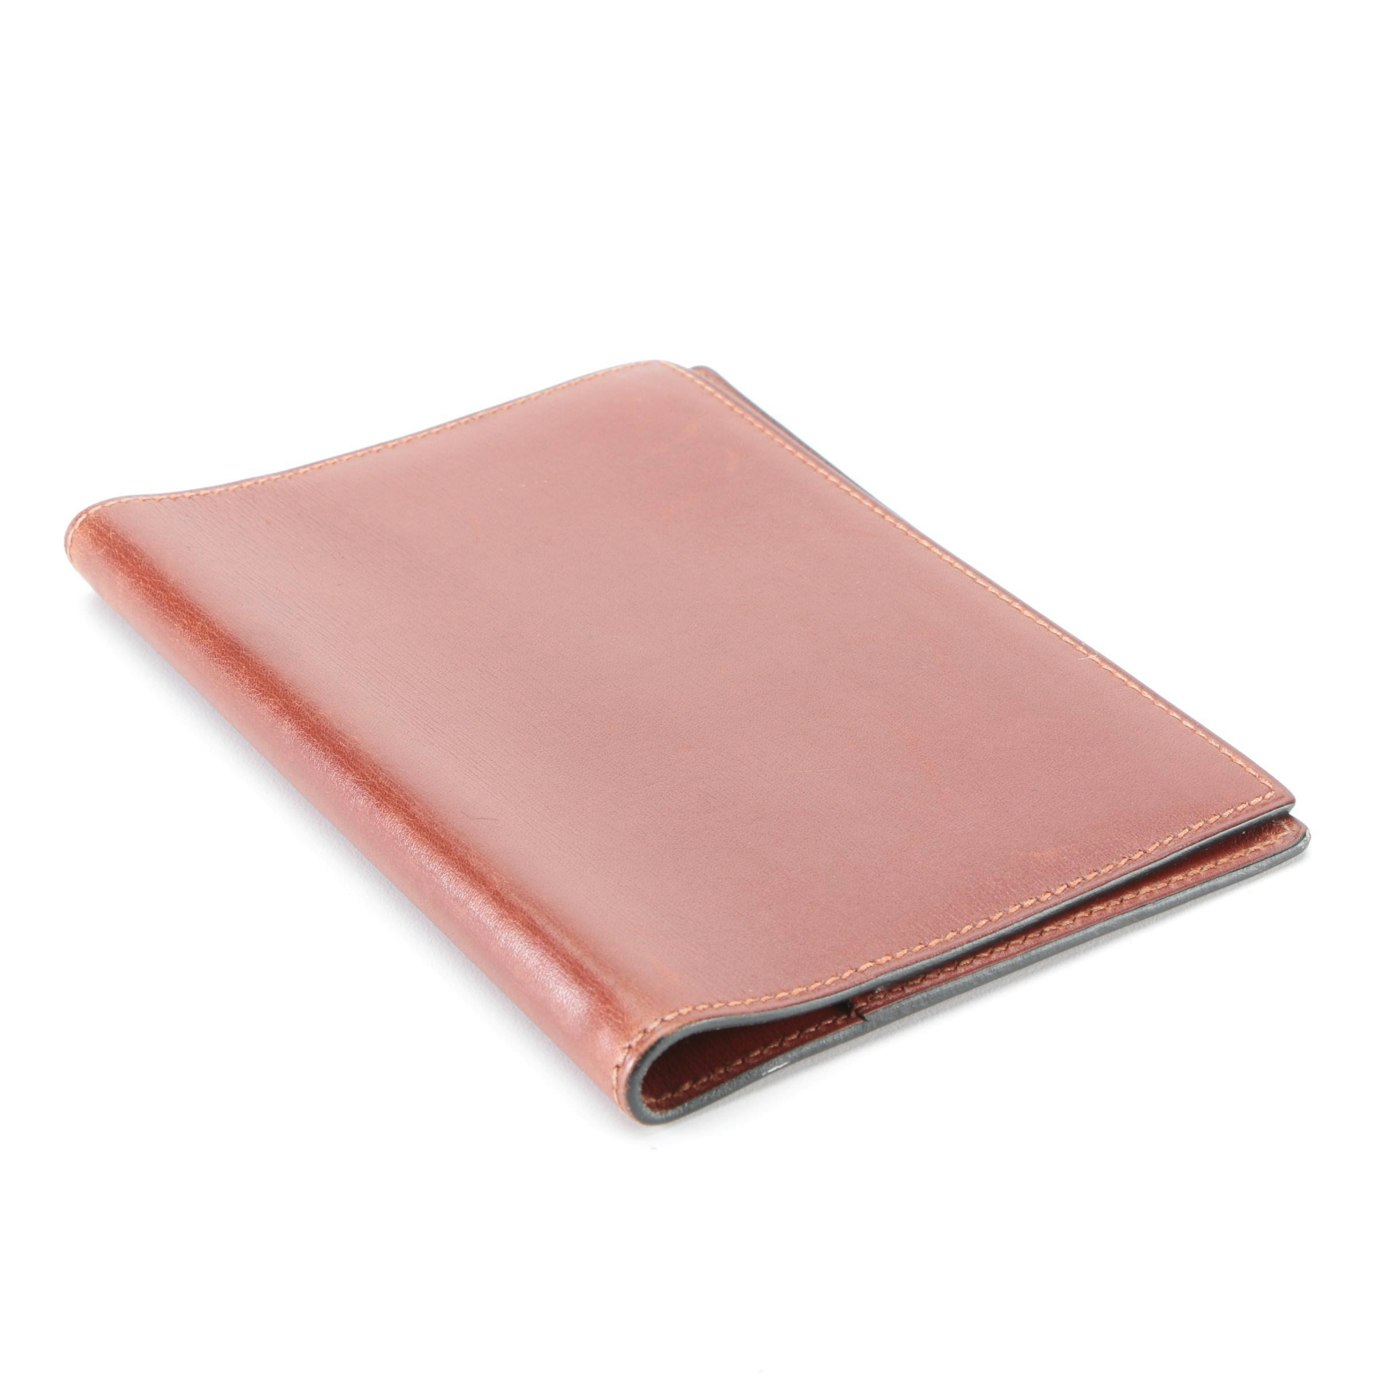 Hermès Passport Cover in Brown Leather | EBTH